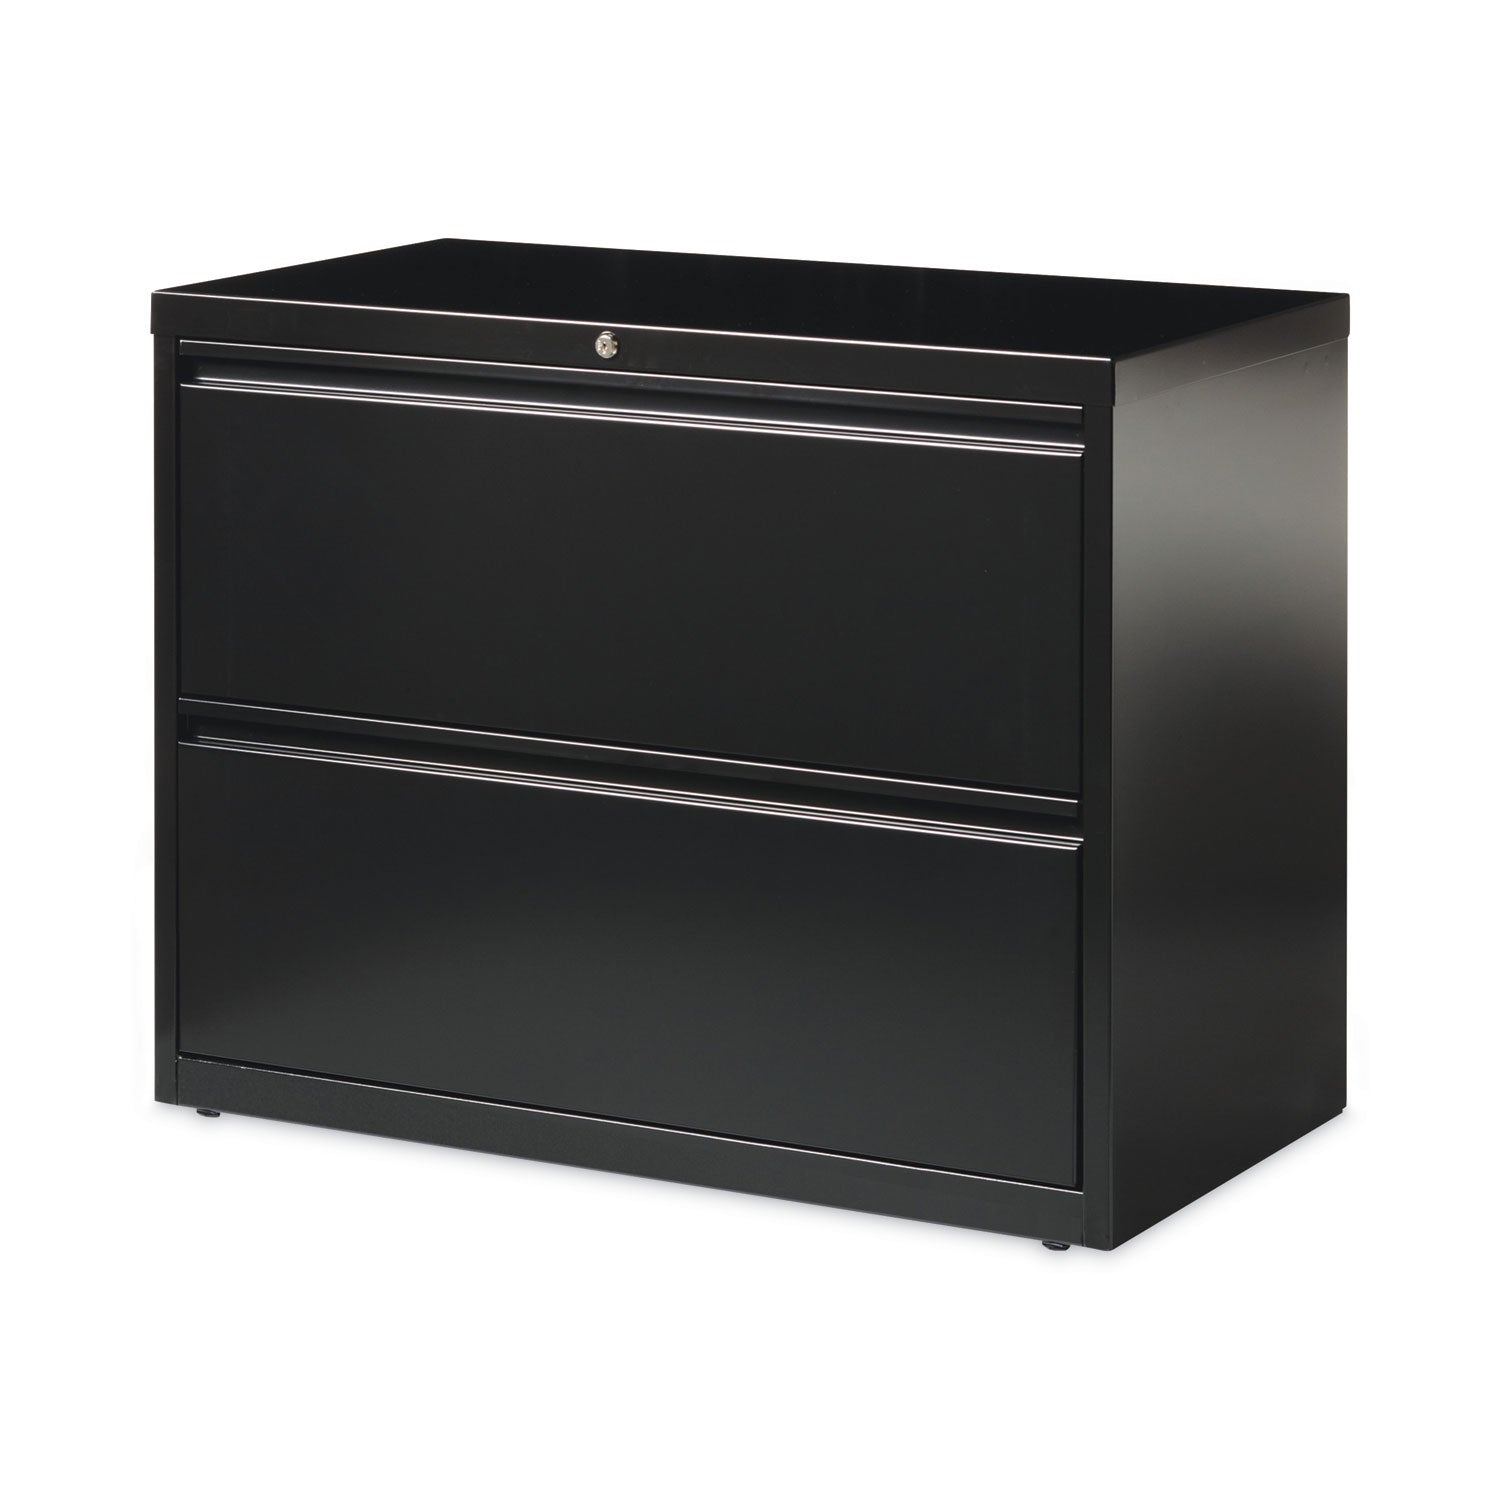 lateral-file-cabinet-2-letter-legal-a4-size-file-drawers-black-36-x-1862-x-28_hid14983 - 2